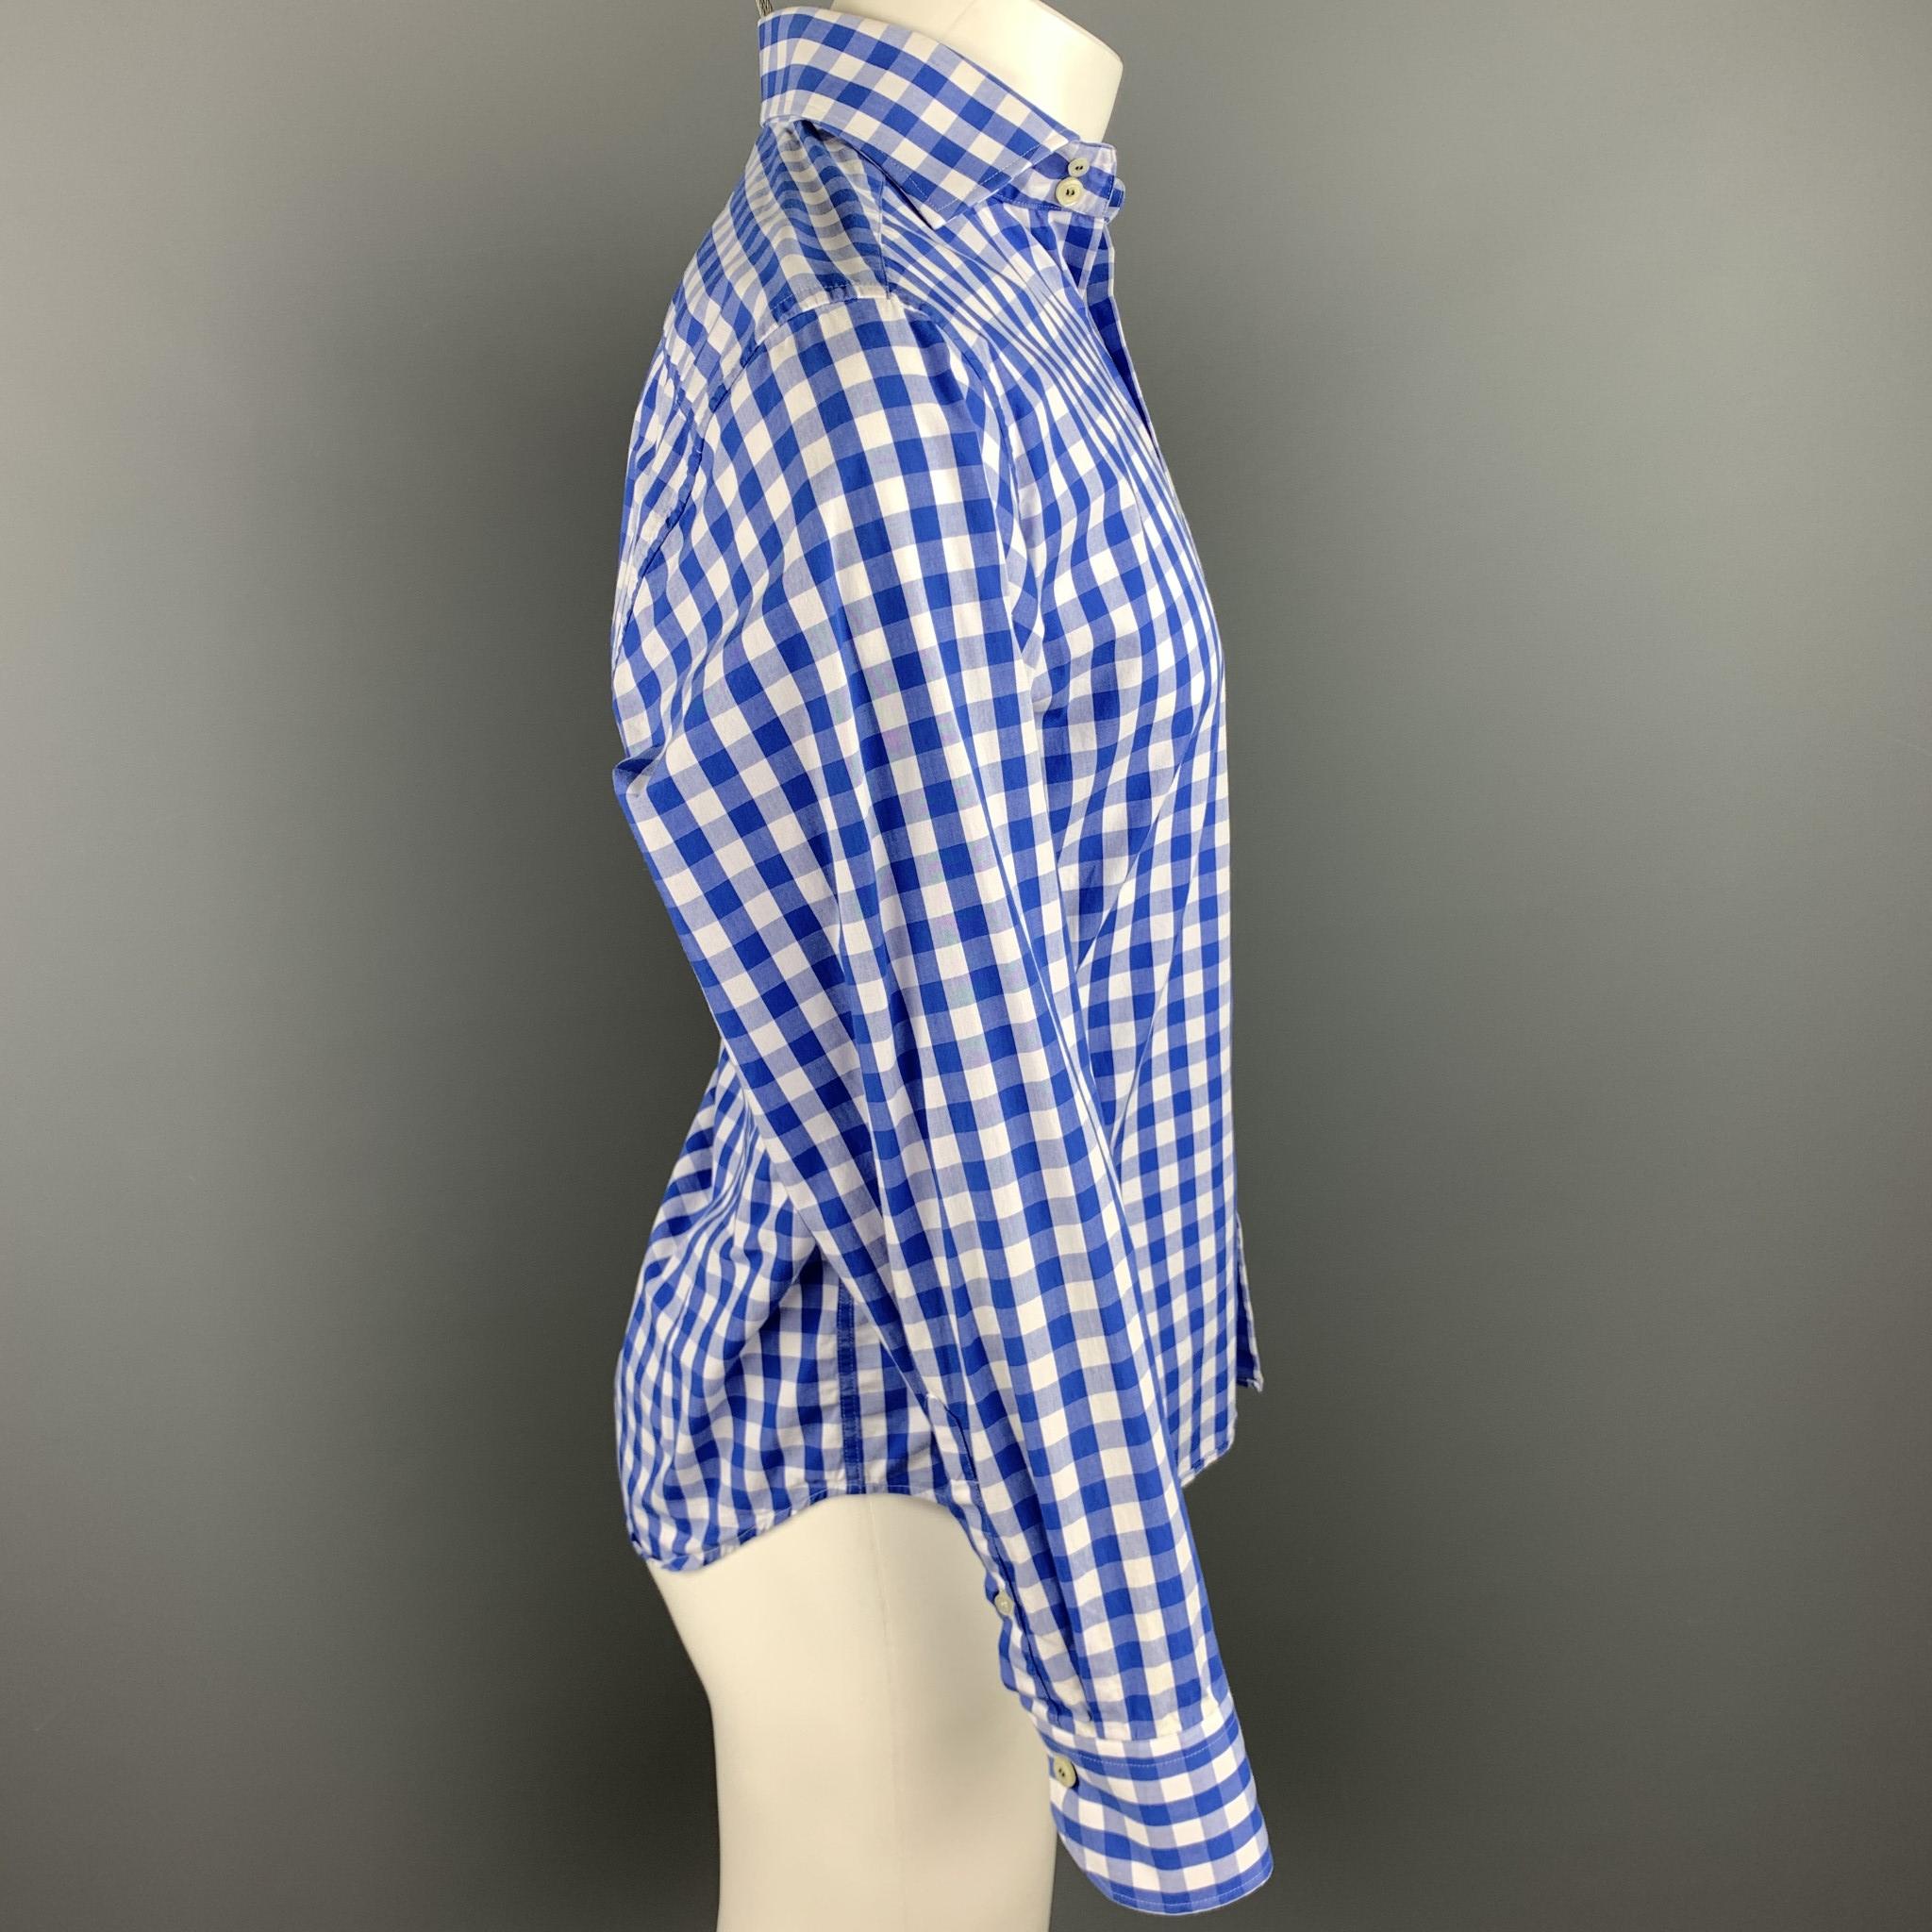 EREDI PISANO long sleeve shirt comes in a blue & white checkered cotton featuring a button up style and a spread collar. 

Very Good Pre-Owned Condition.
Marked: 15/38

Measurements:

Shoulder: 17 in. 
Chest: 40 in. 
Sleeve: 25 in. 
Length: 28 in.